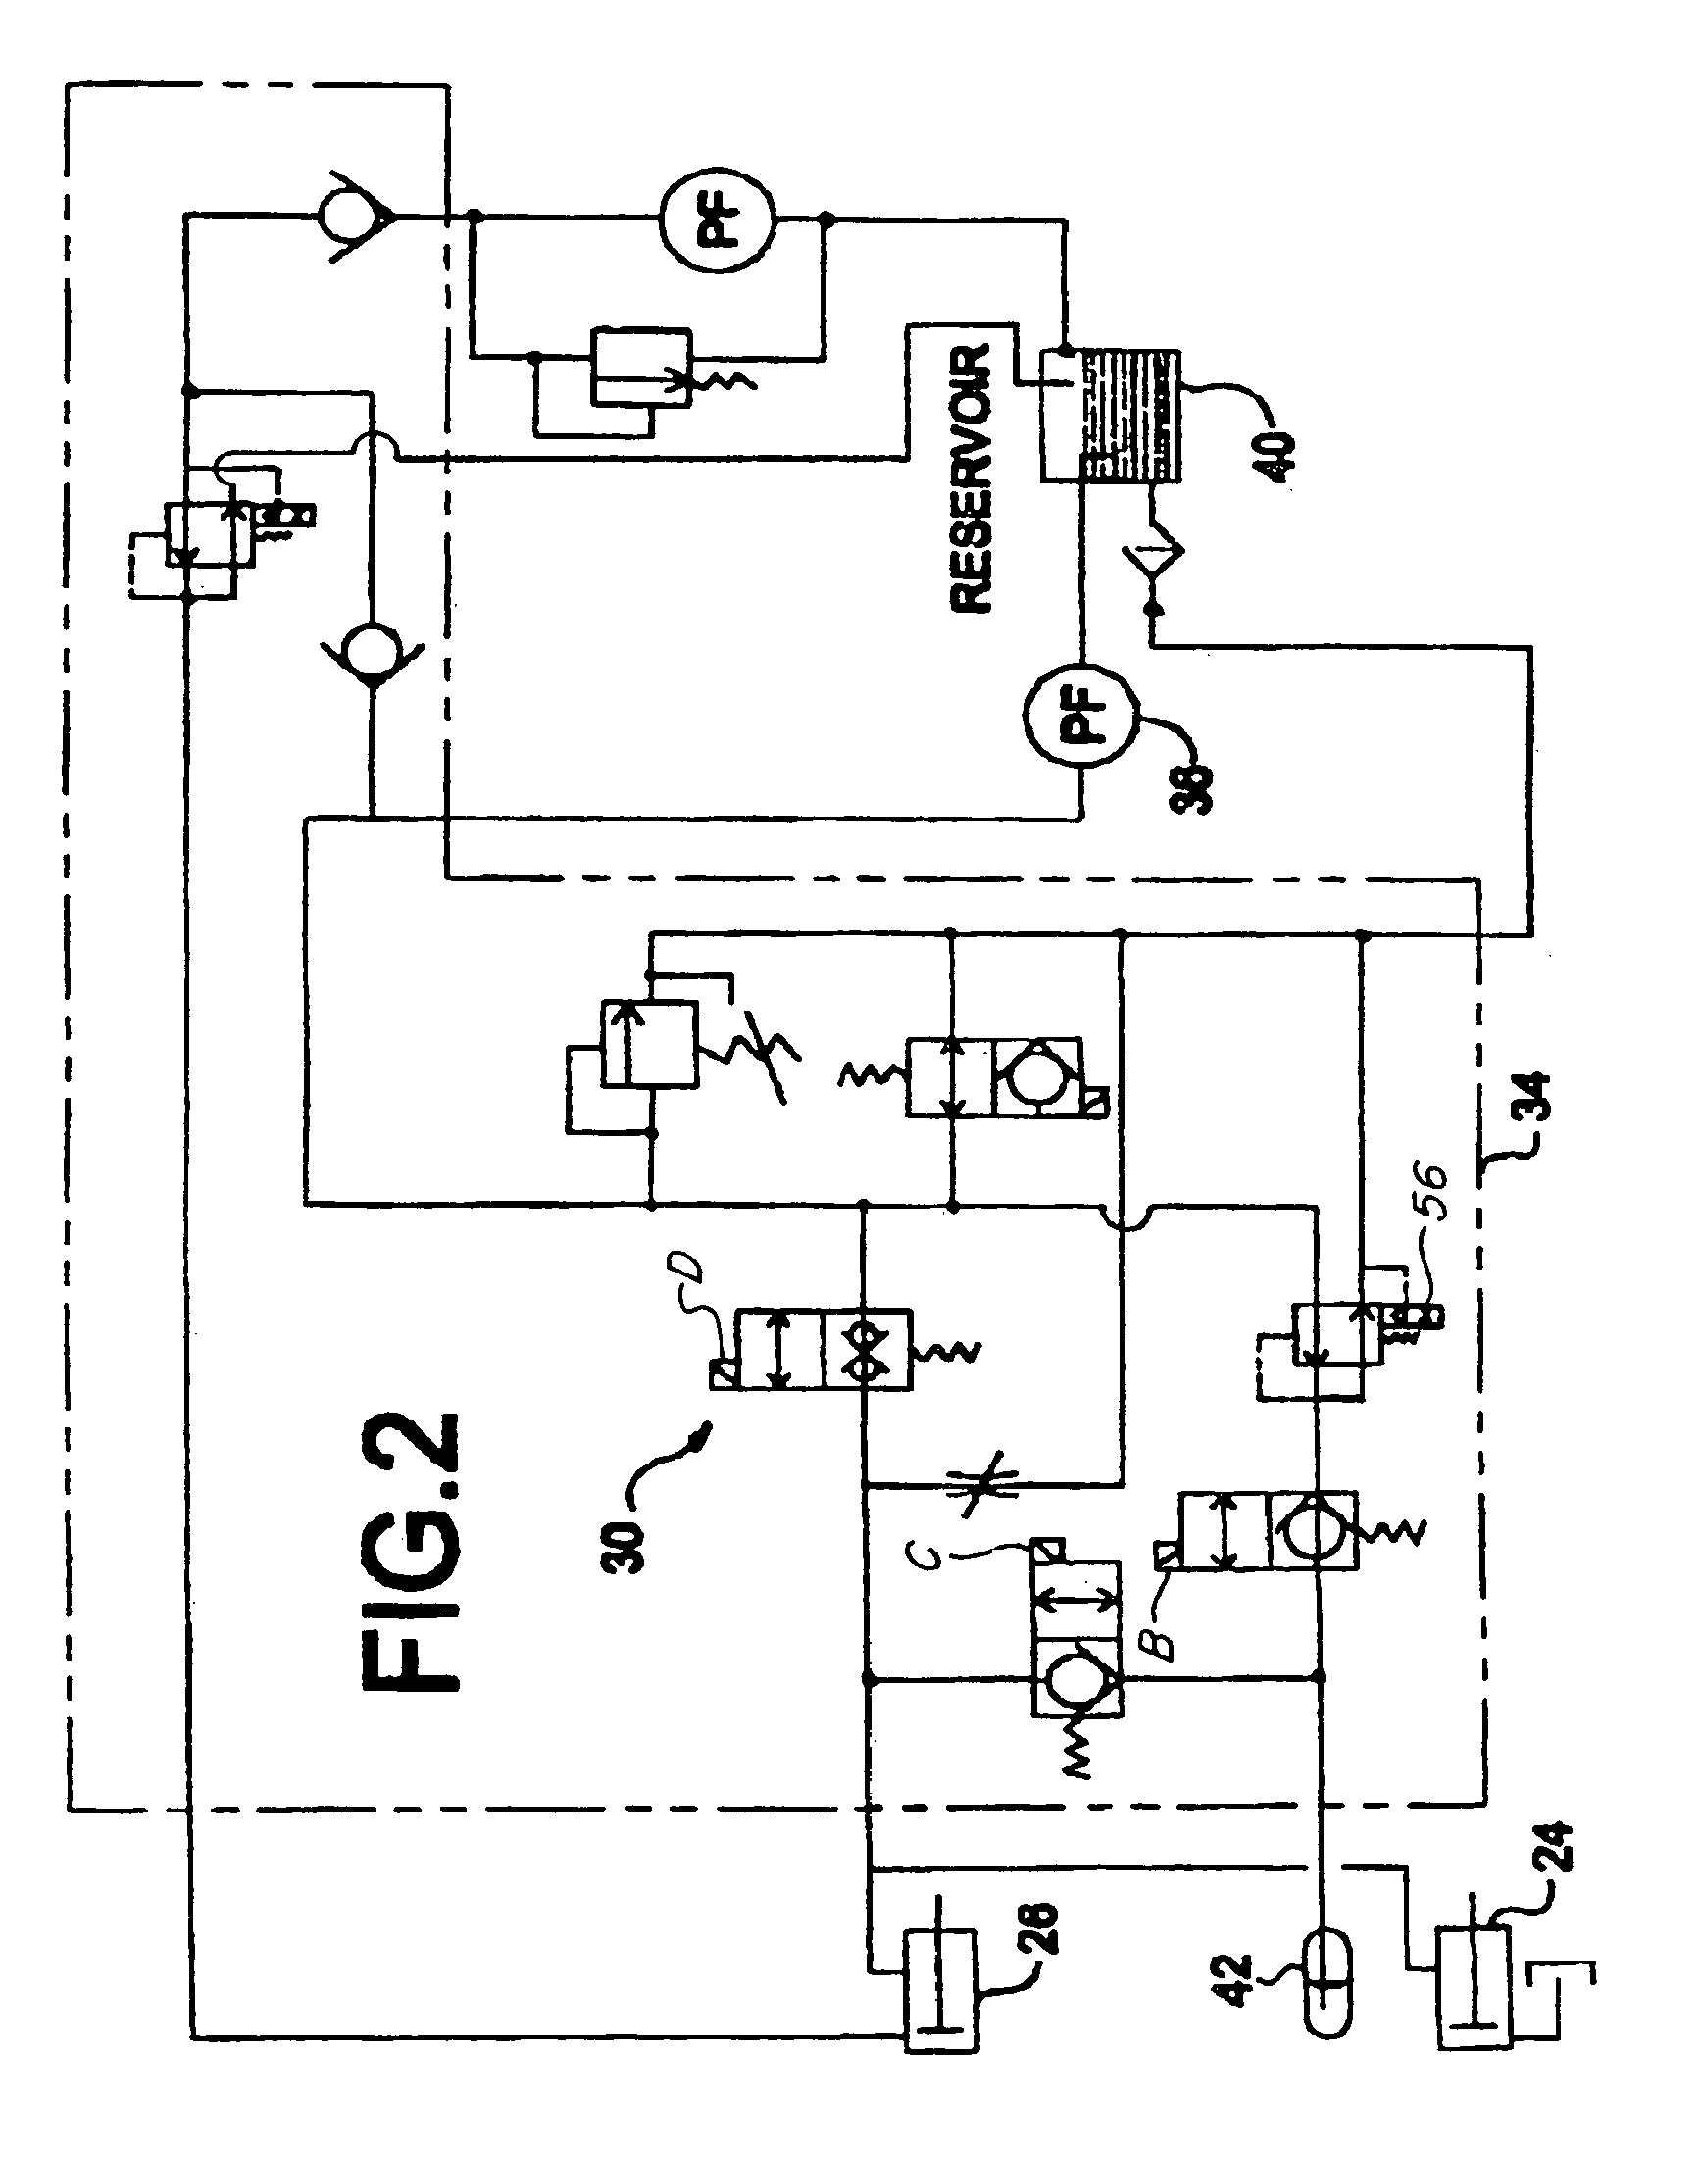 Method for managing the electrical control system of a windrower header flotation and lift system